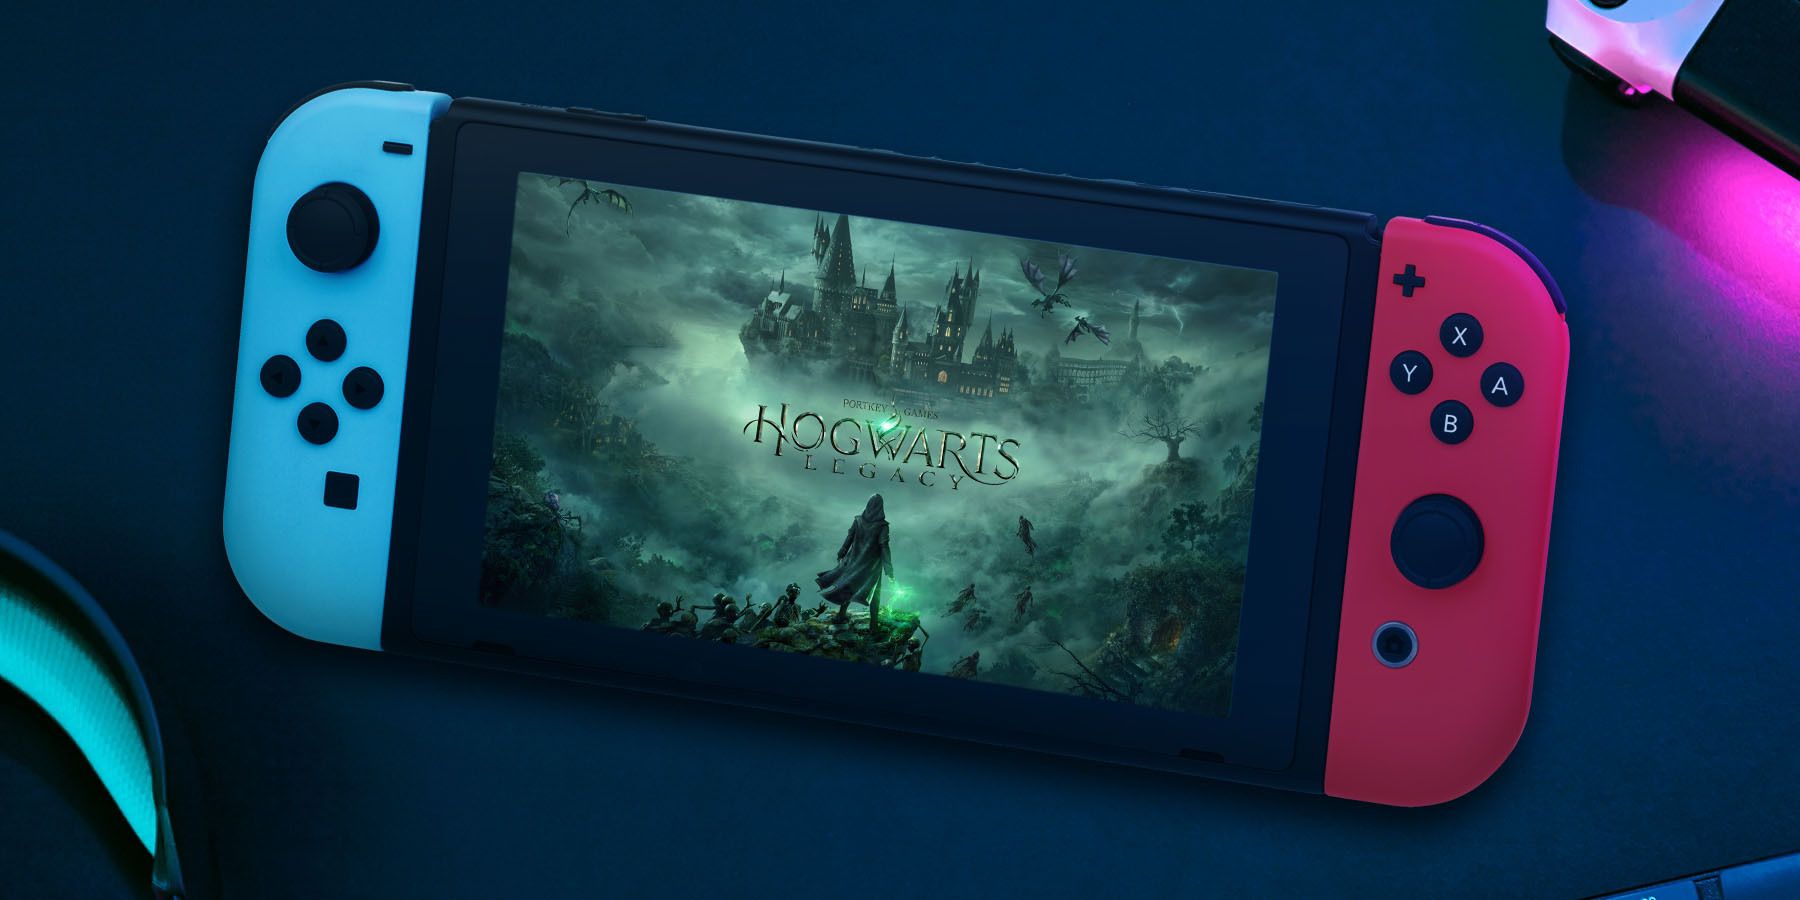 Hogwarts Legacy is yet to get a Nintendo Switch release date and